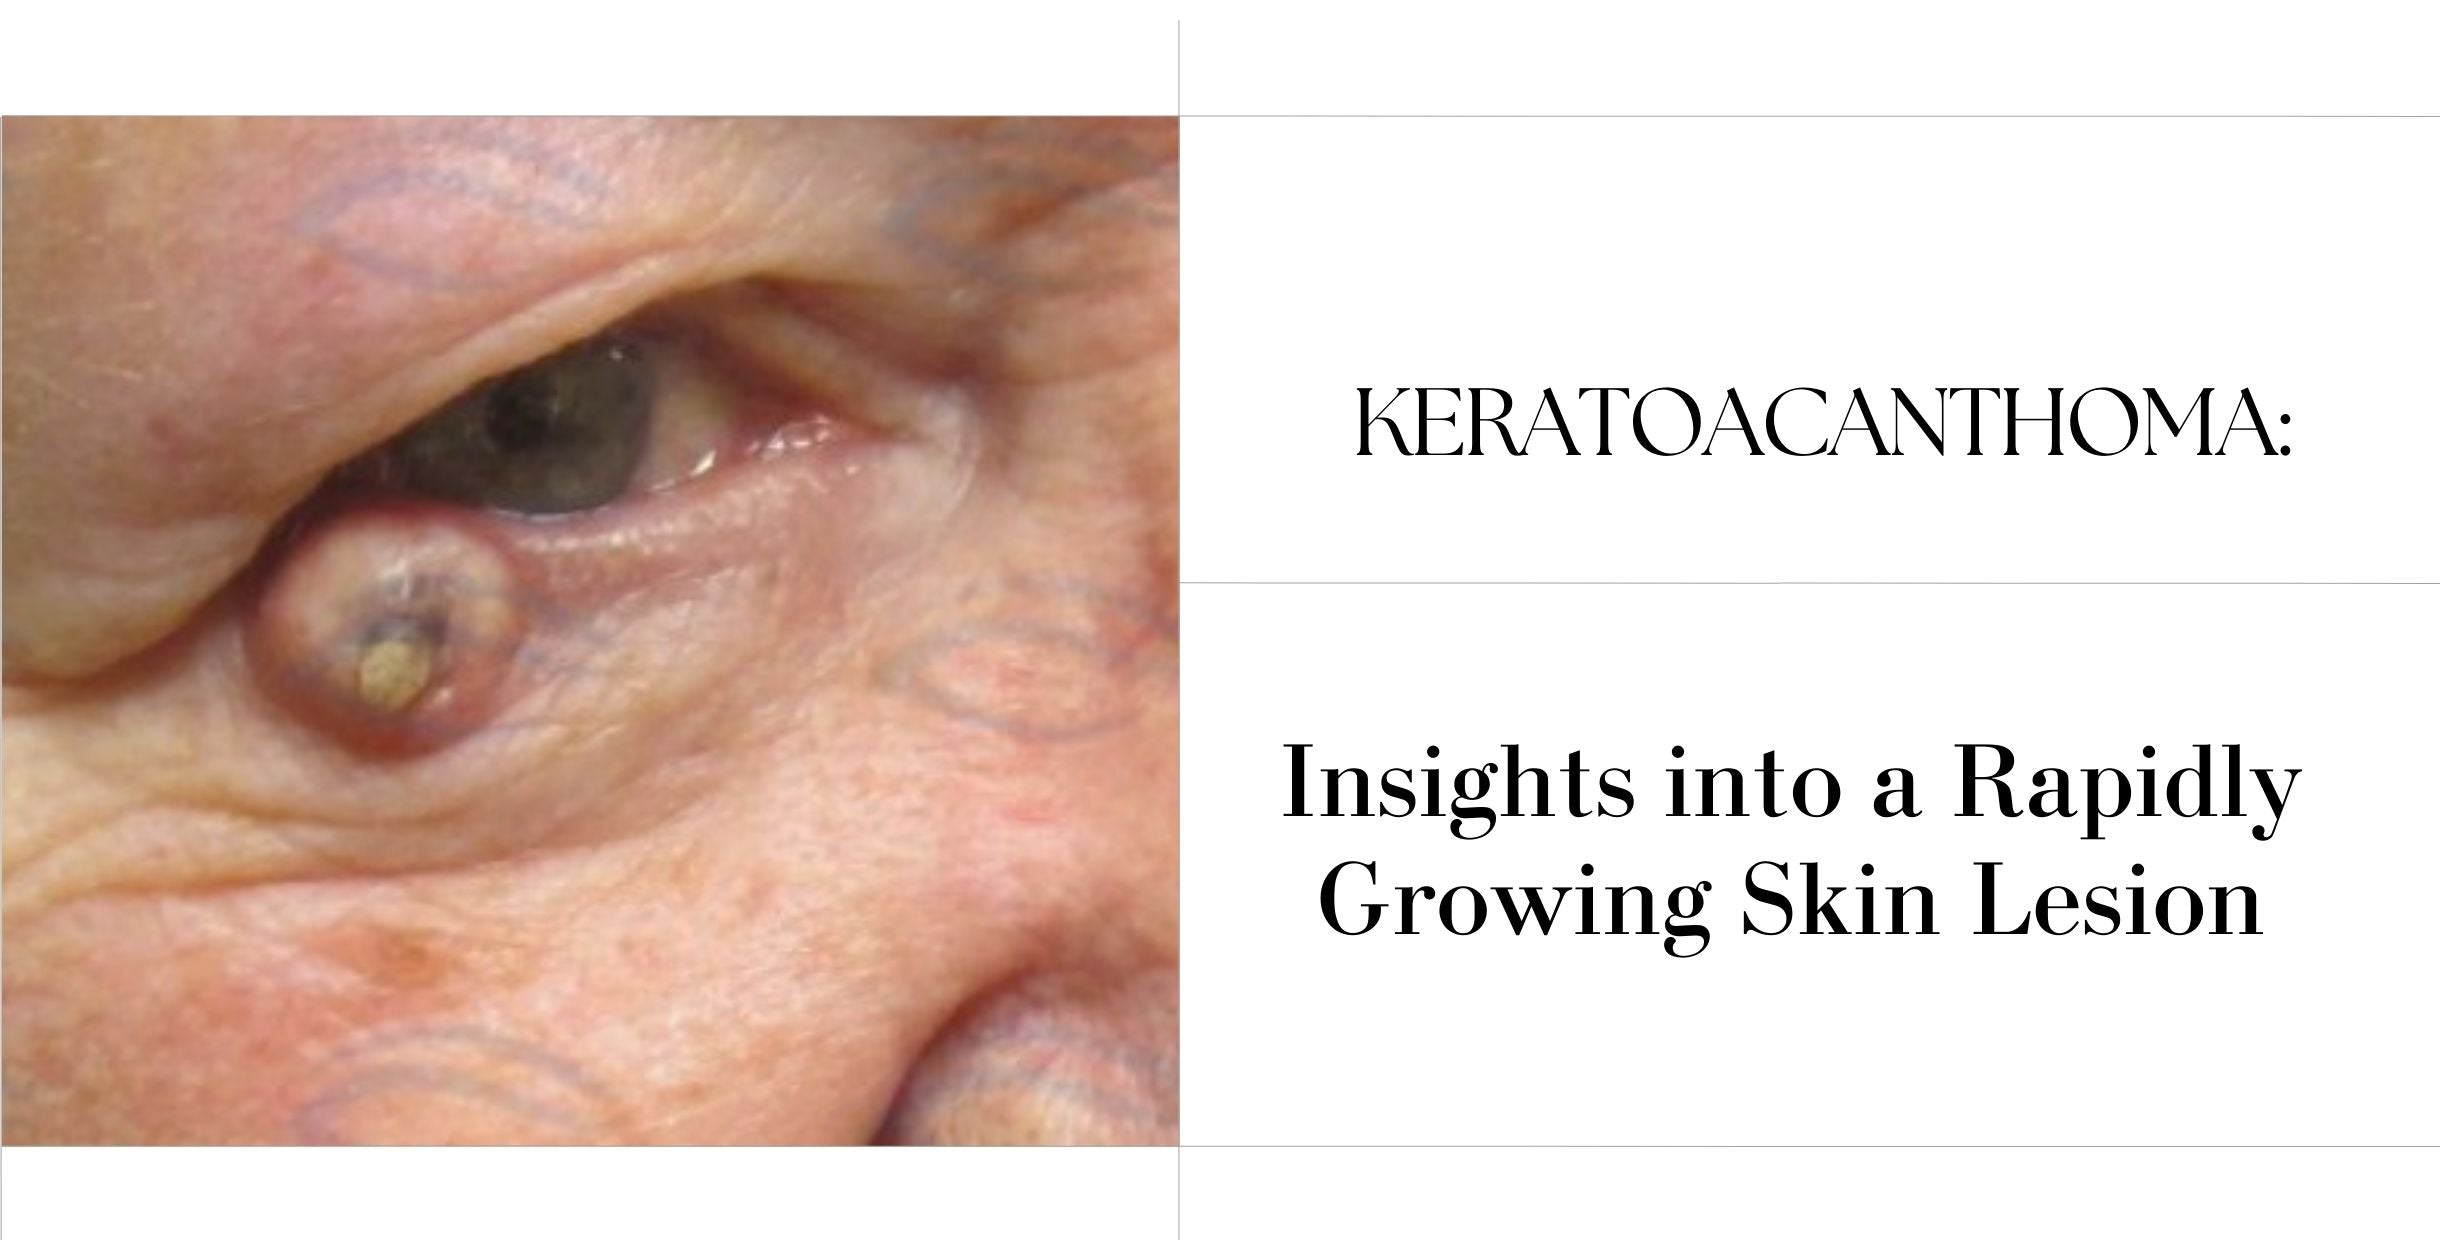 Keratoacanthoma: Insights into a Rapidly Growing Skin Lesion